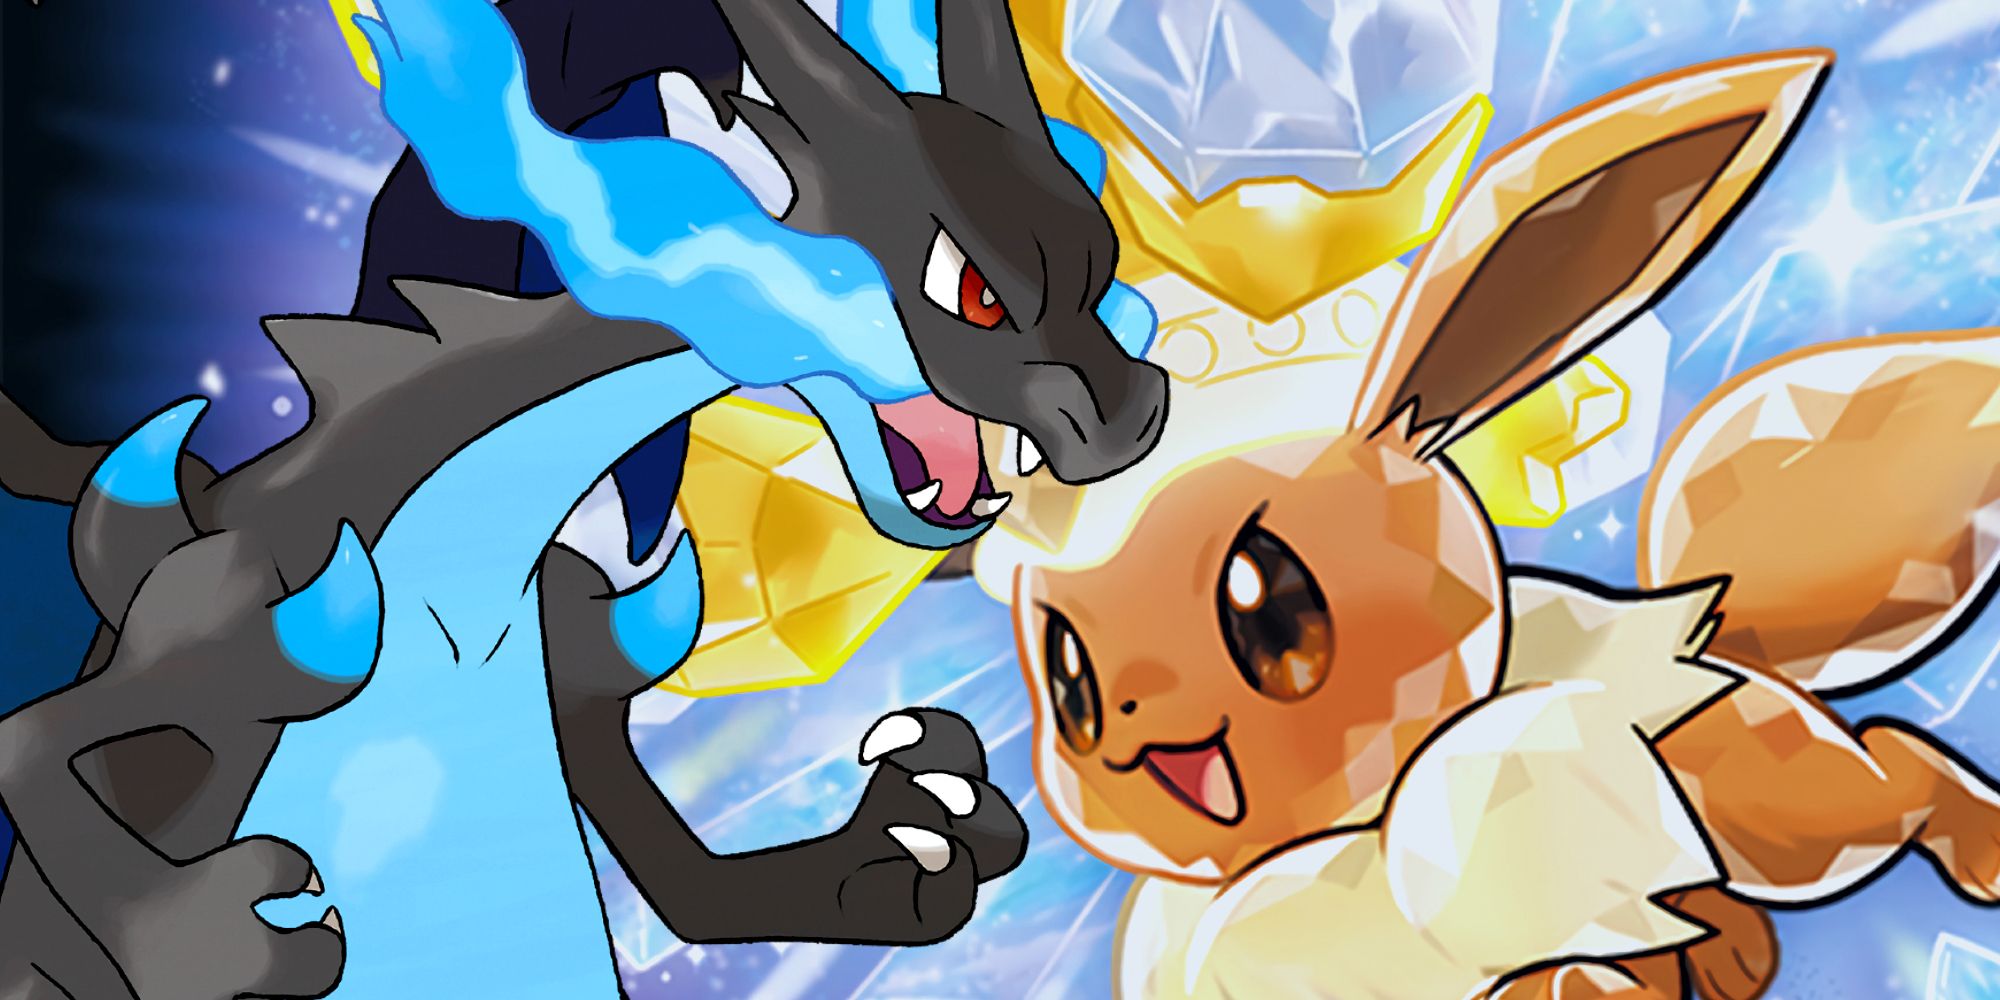 Mega Charizard X from Pokémon, with its alternate blue and black color palette, next to Terastallized Eevee, wearing a diamond crown.